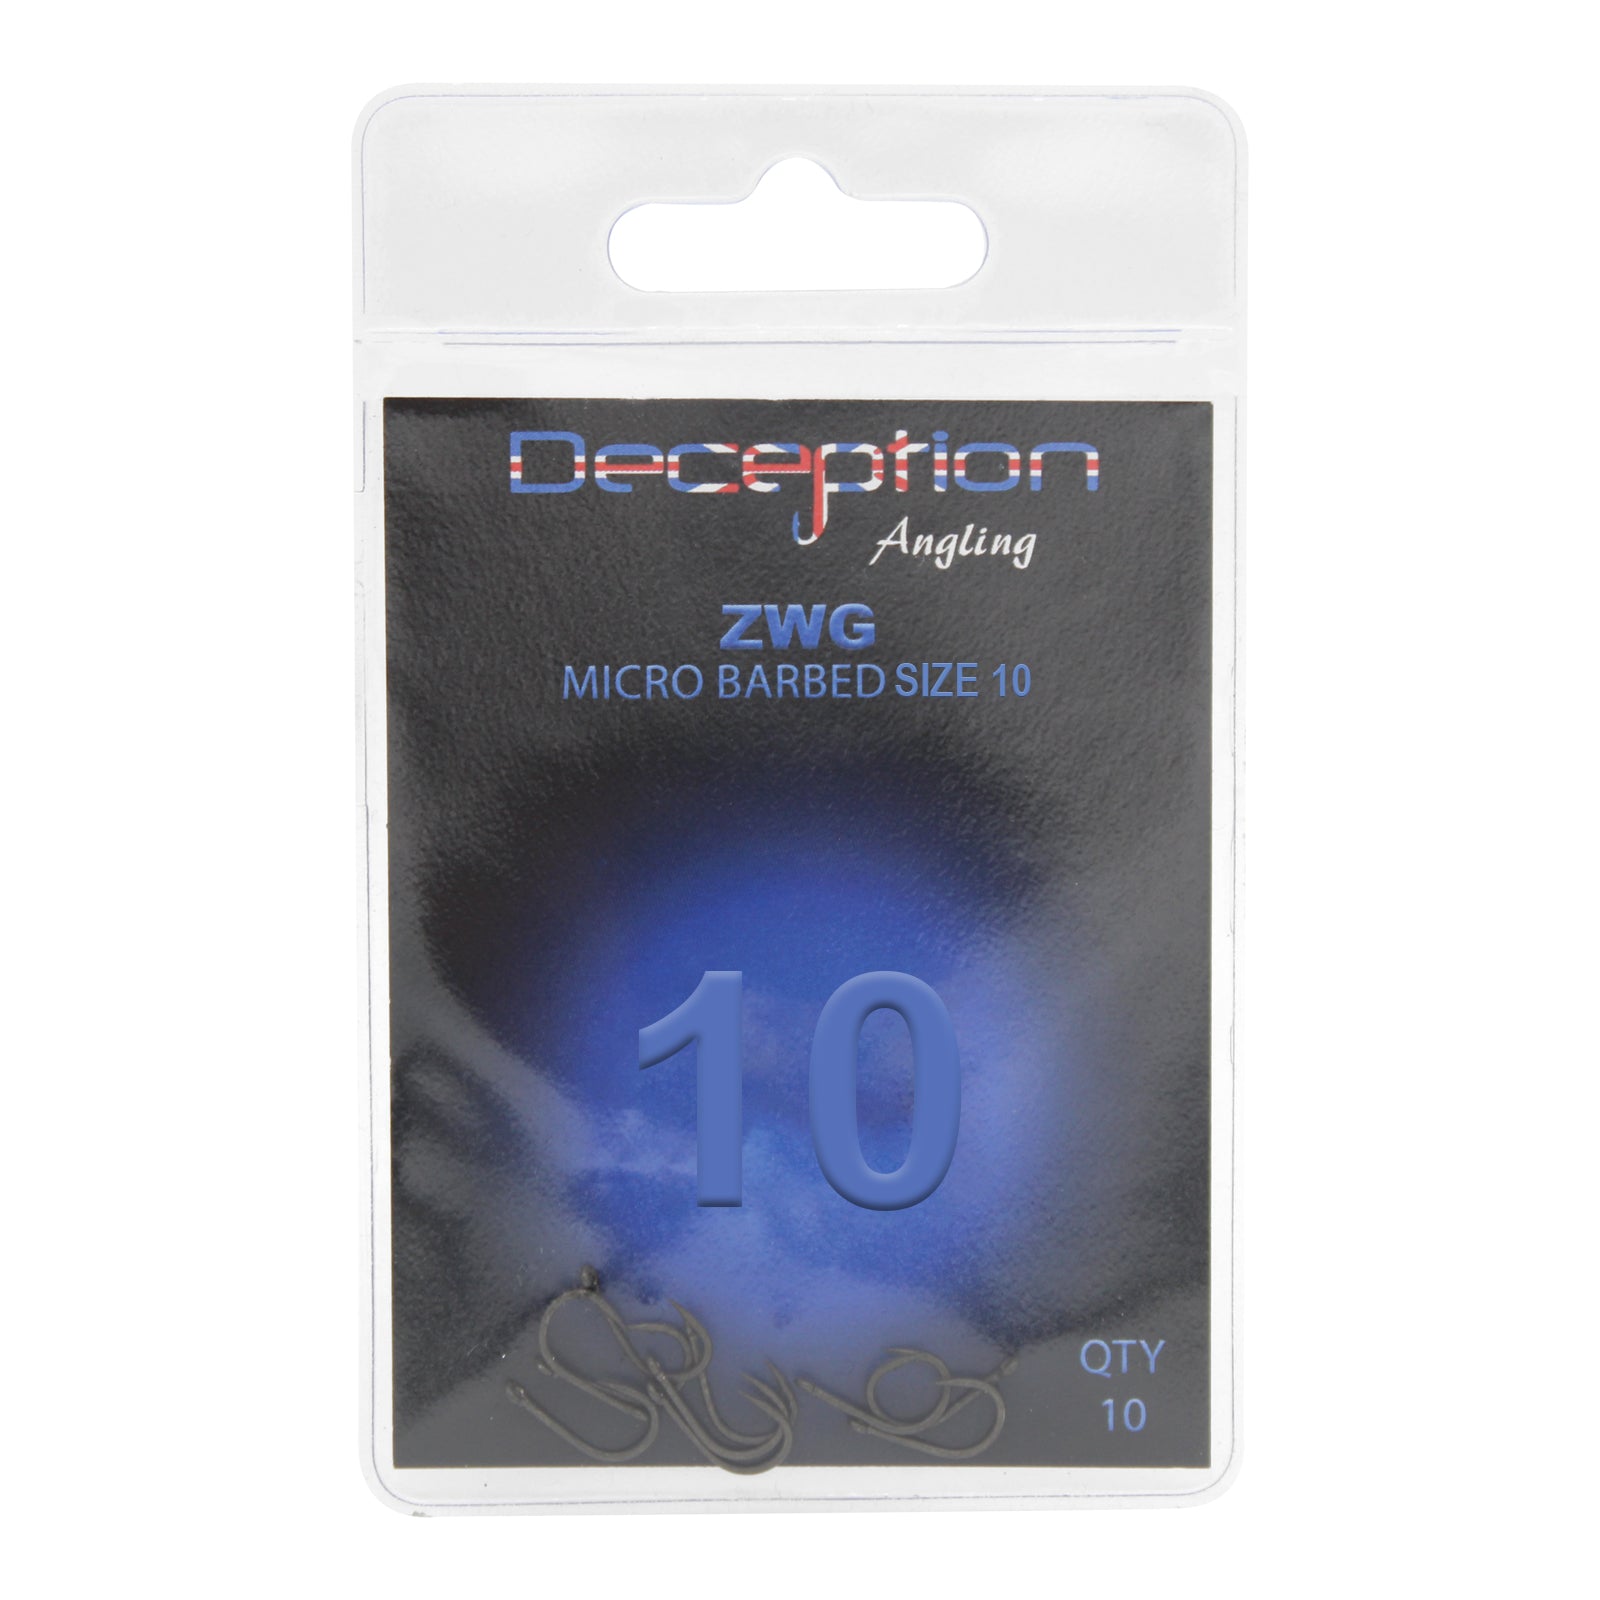 Deception Angling ZWG Micro Barbed Fishing Hooks Pack of 10 - Size 10